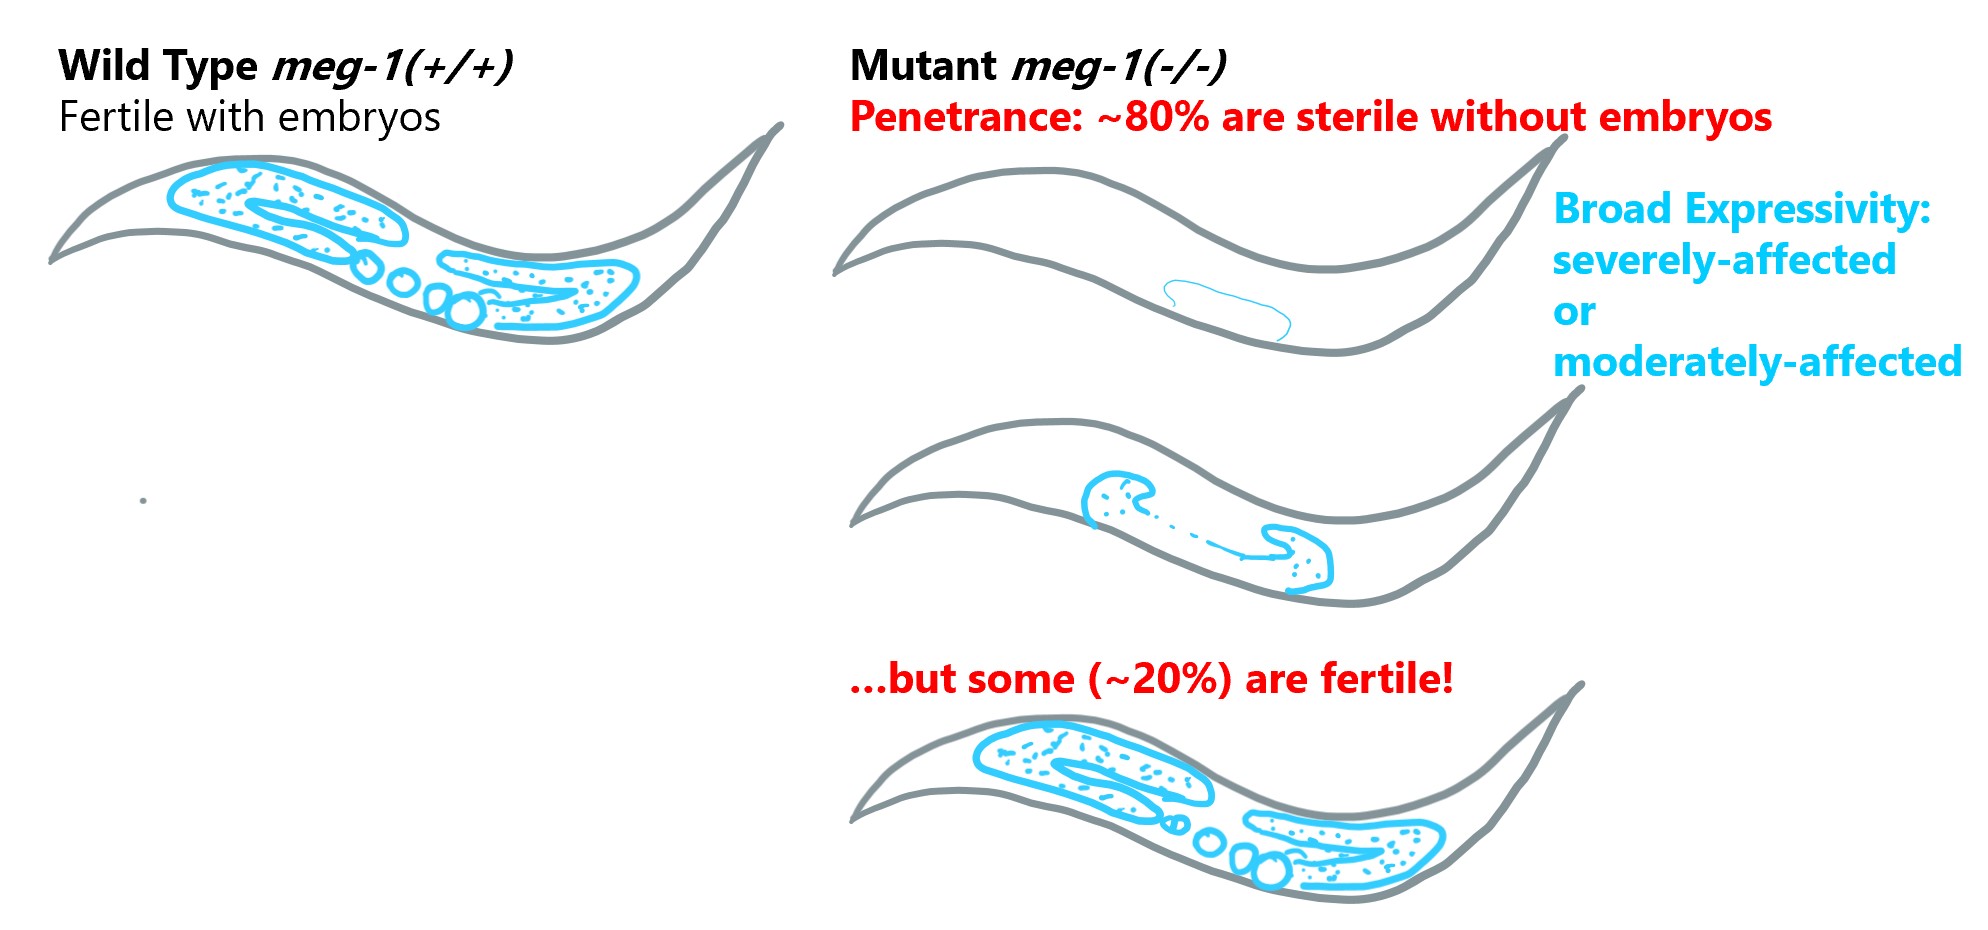 wild type worms are fertile with embryos. meg 1 mutants are eighty percent sterile, some with severely affected germline, some moderately affected, or fertile.